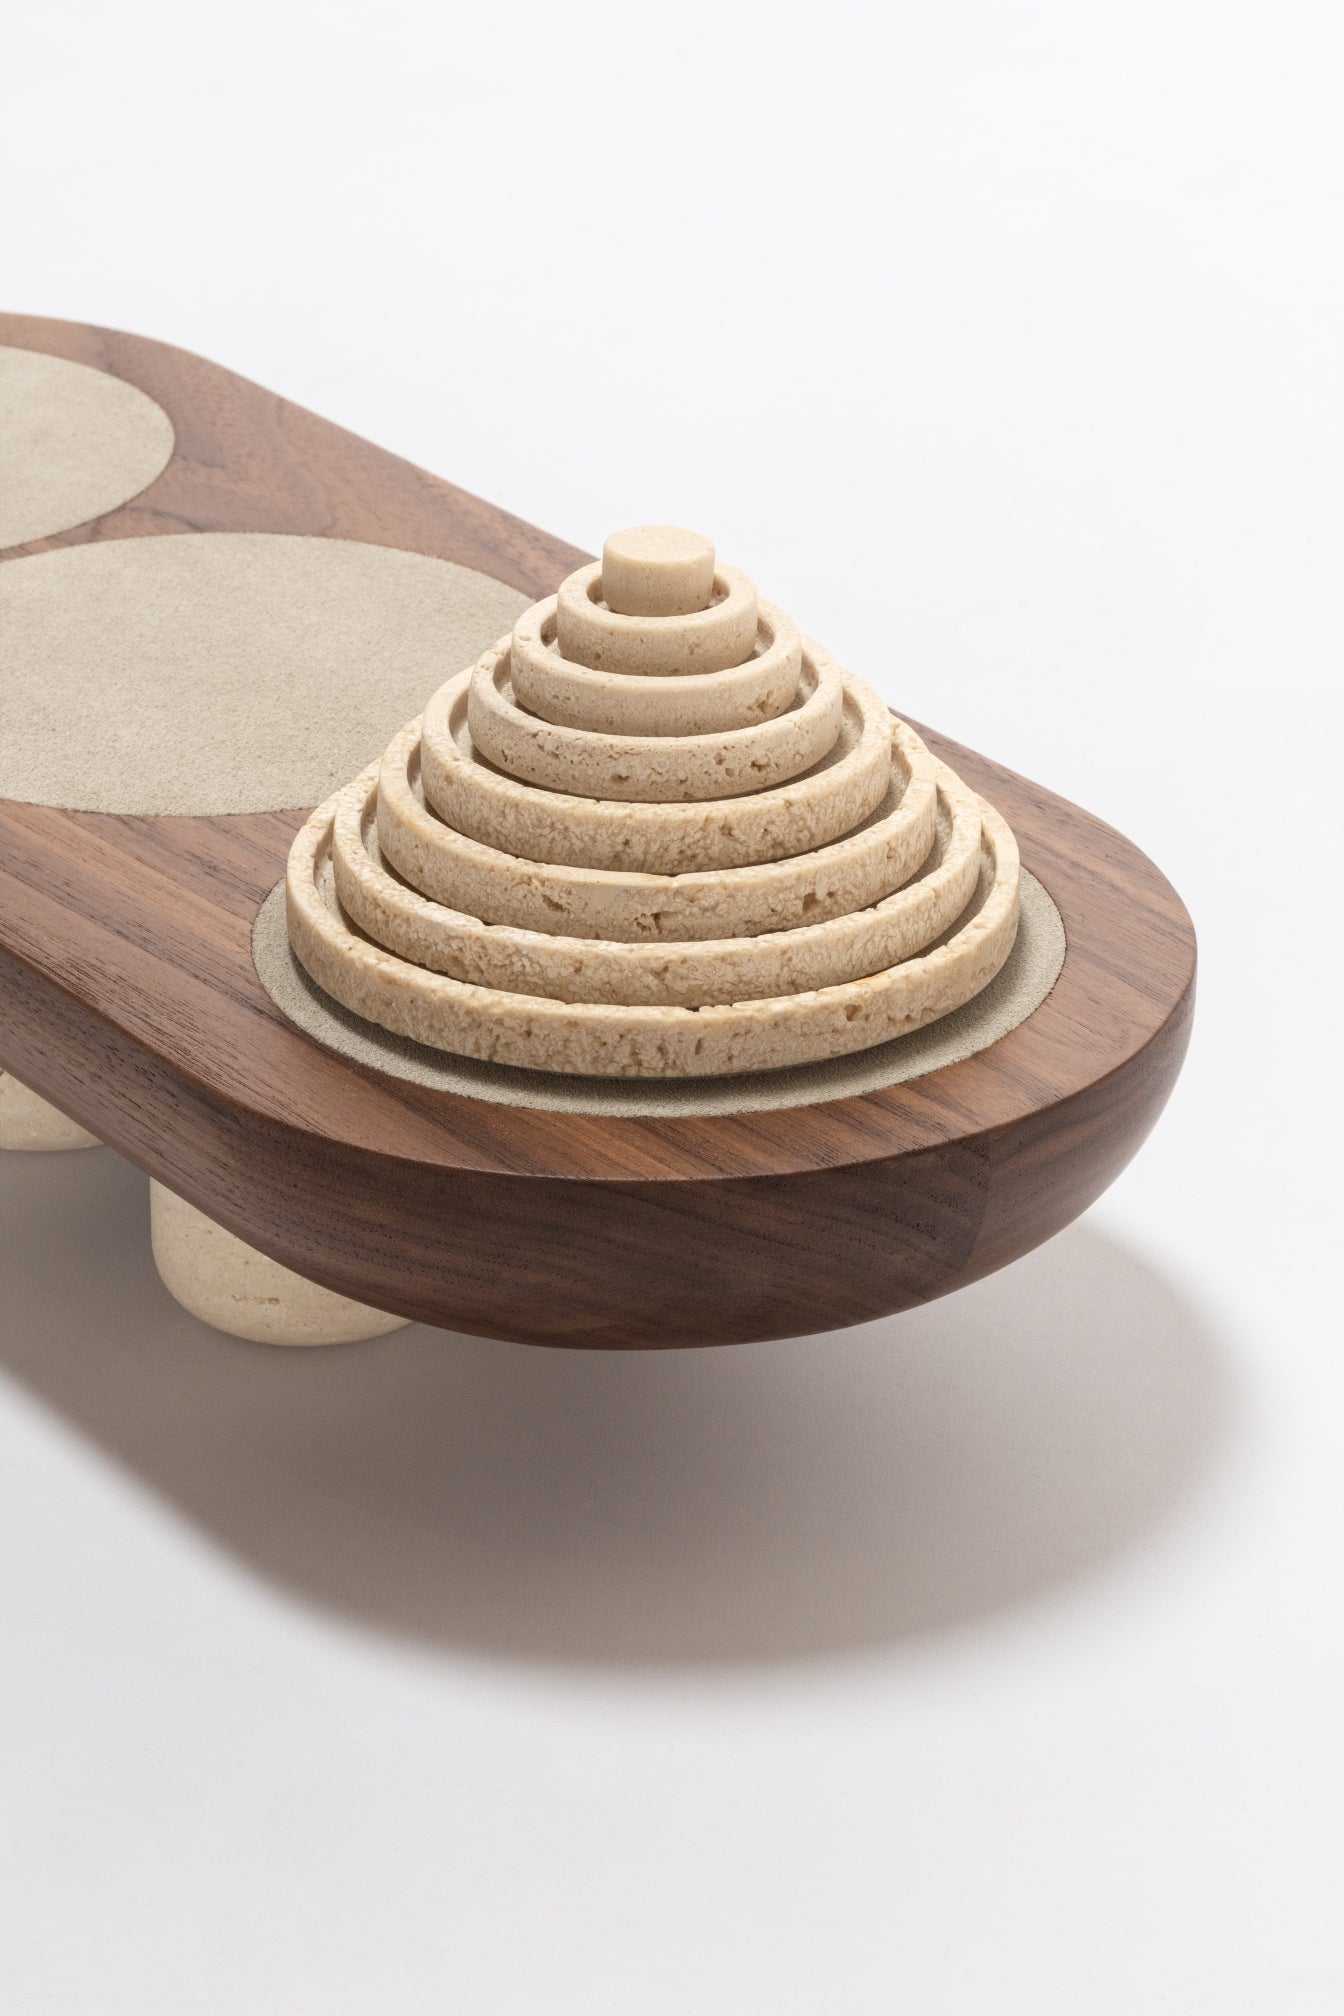 Giobagnara Mocambo Tower Of Hanoi Game Set | Carved Wood and Stone with Modeled, Almost Primitive Lines | Unique and Artistic Design | Explore a Range of Luxury Board Games, Classic Games, and Gift Games at 2Jour Concierge, #1 luxury high-end gift & lifestyle shop